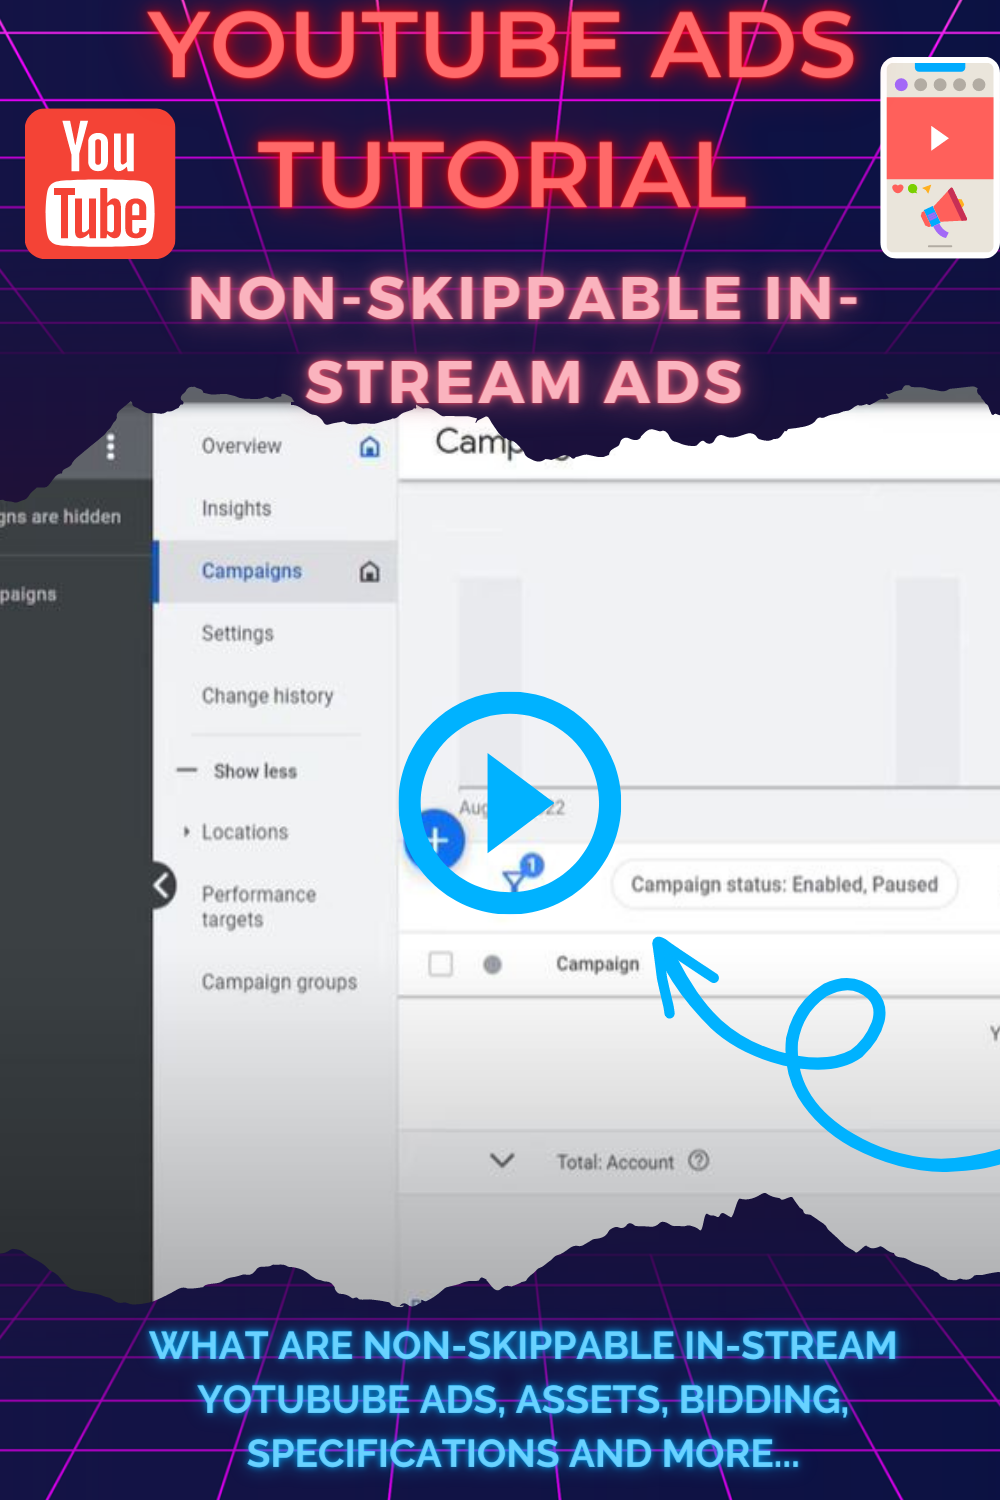 YOUTUBE ADS TUTORIAL NON-SKIPPABLE IN-STREAM ADS